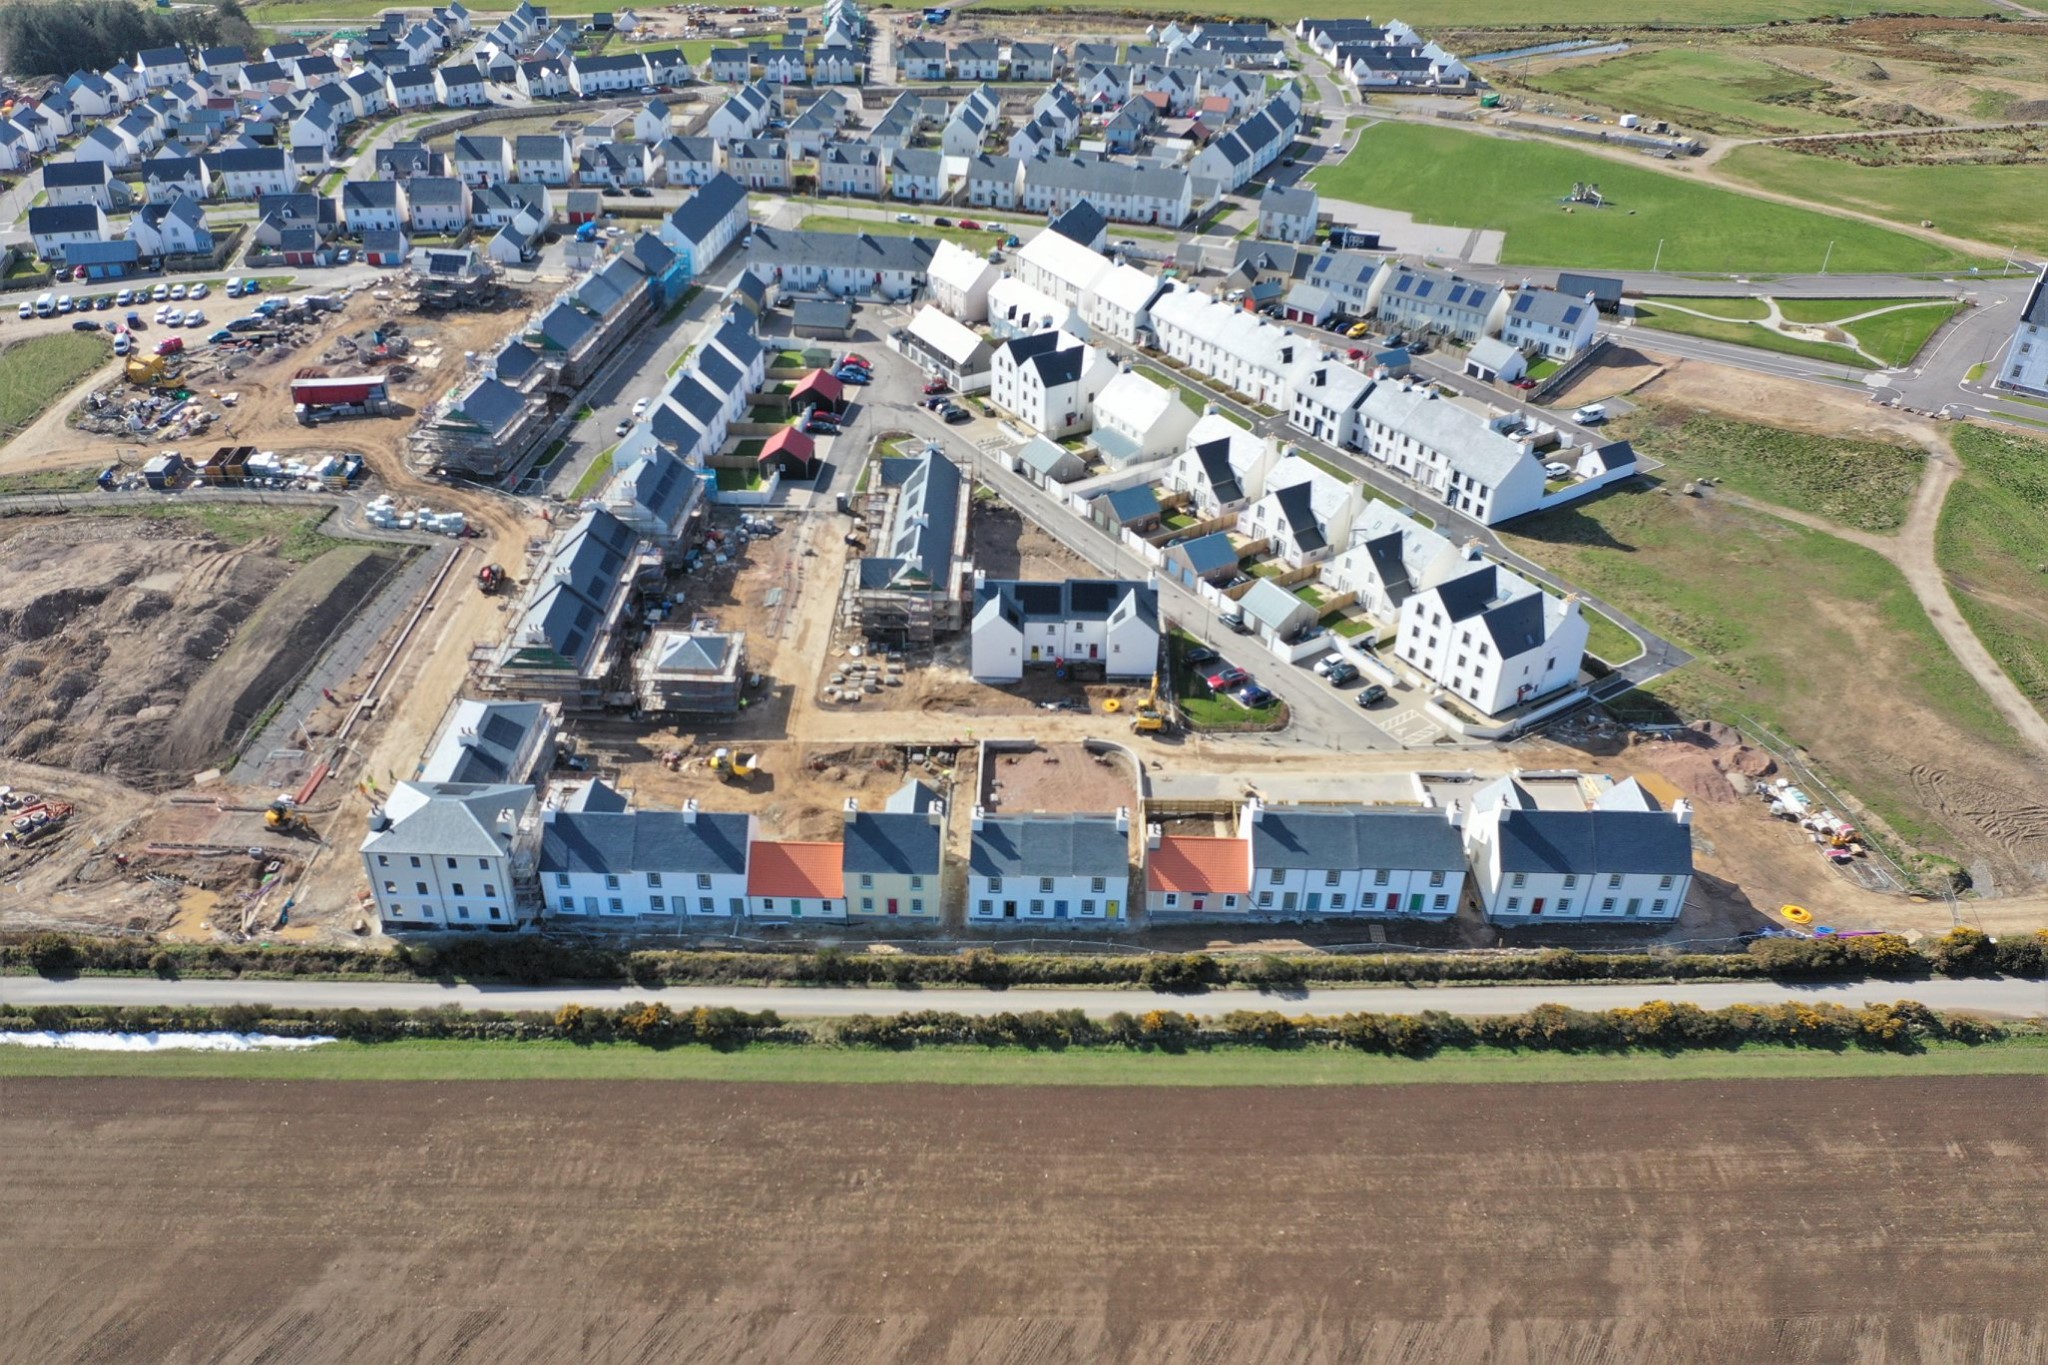 In Pictures: Places for People makes progress at Chapelton development